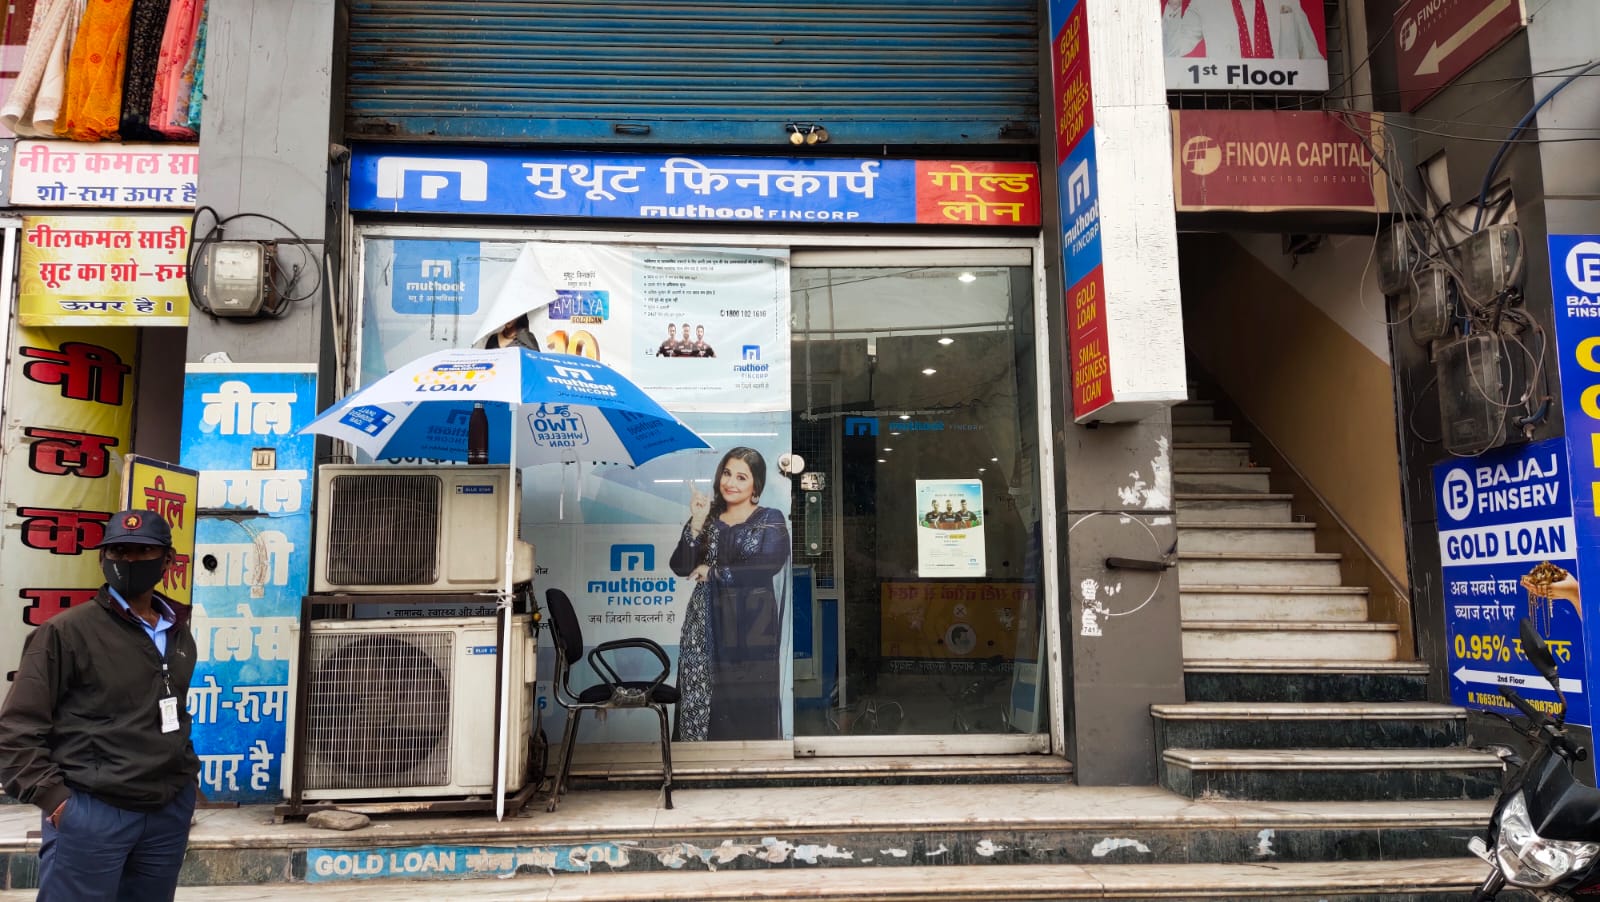 Muthoot Fincorp Gold Loan Services in Beawar Road, Ajmer, Rajasthan